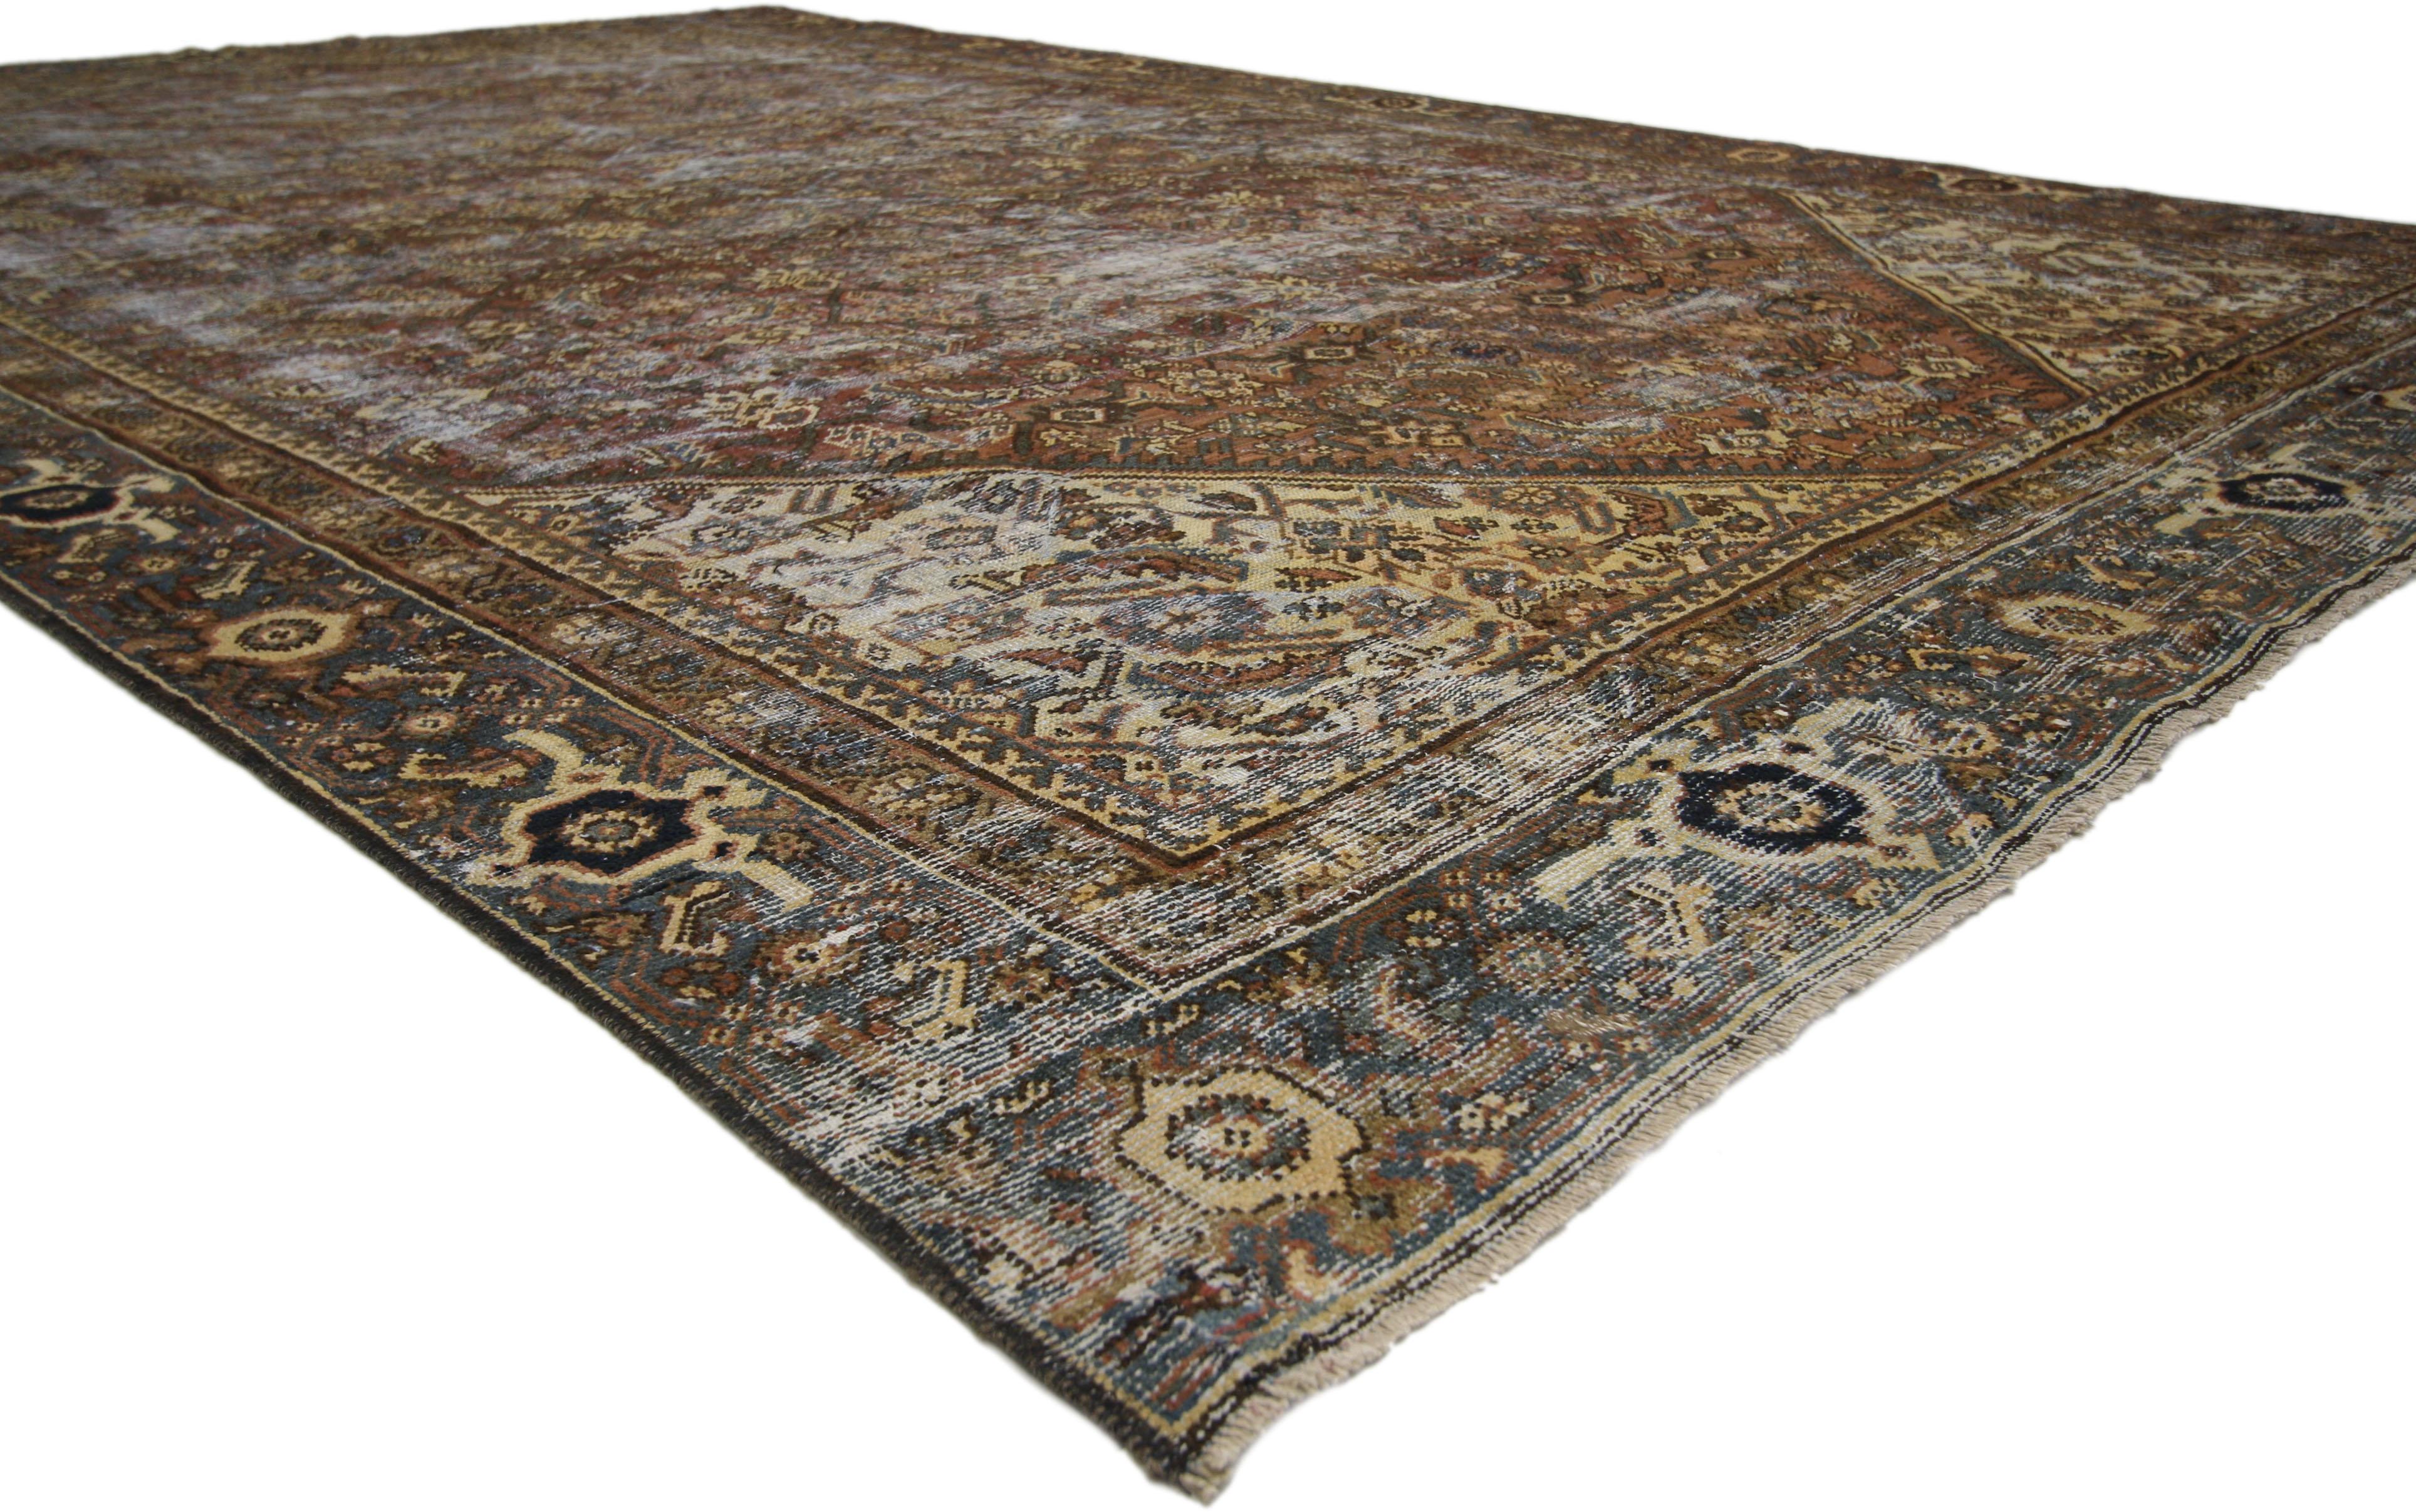 60673 Distressed Antique Persian Mahal Rug with Traditional English Rustic Style 08'04 x 12'07. With its perfectly worn-in charm and rustic sensibility, this hand-knotted wool distressed antique Persian Mahal rug will take on a curated lived-in look